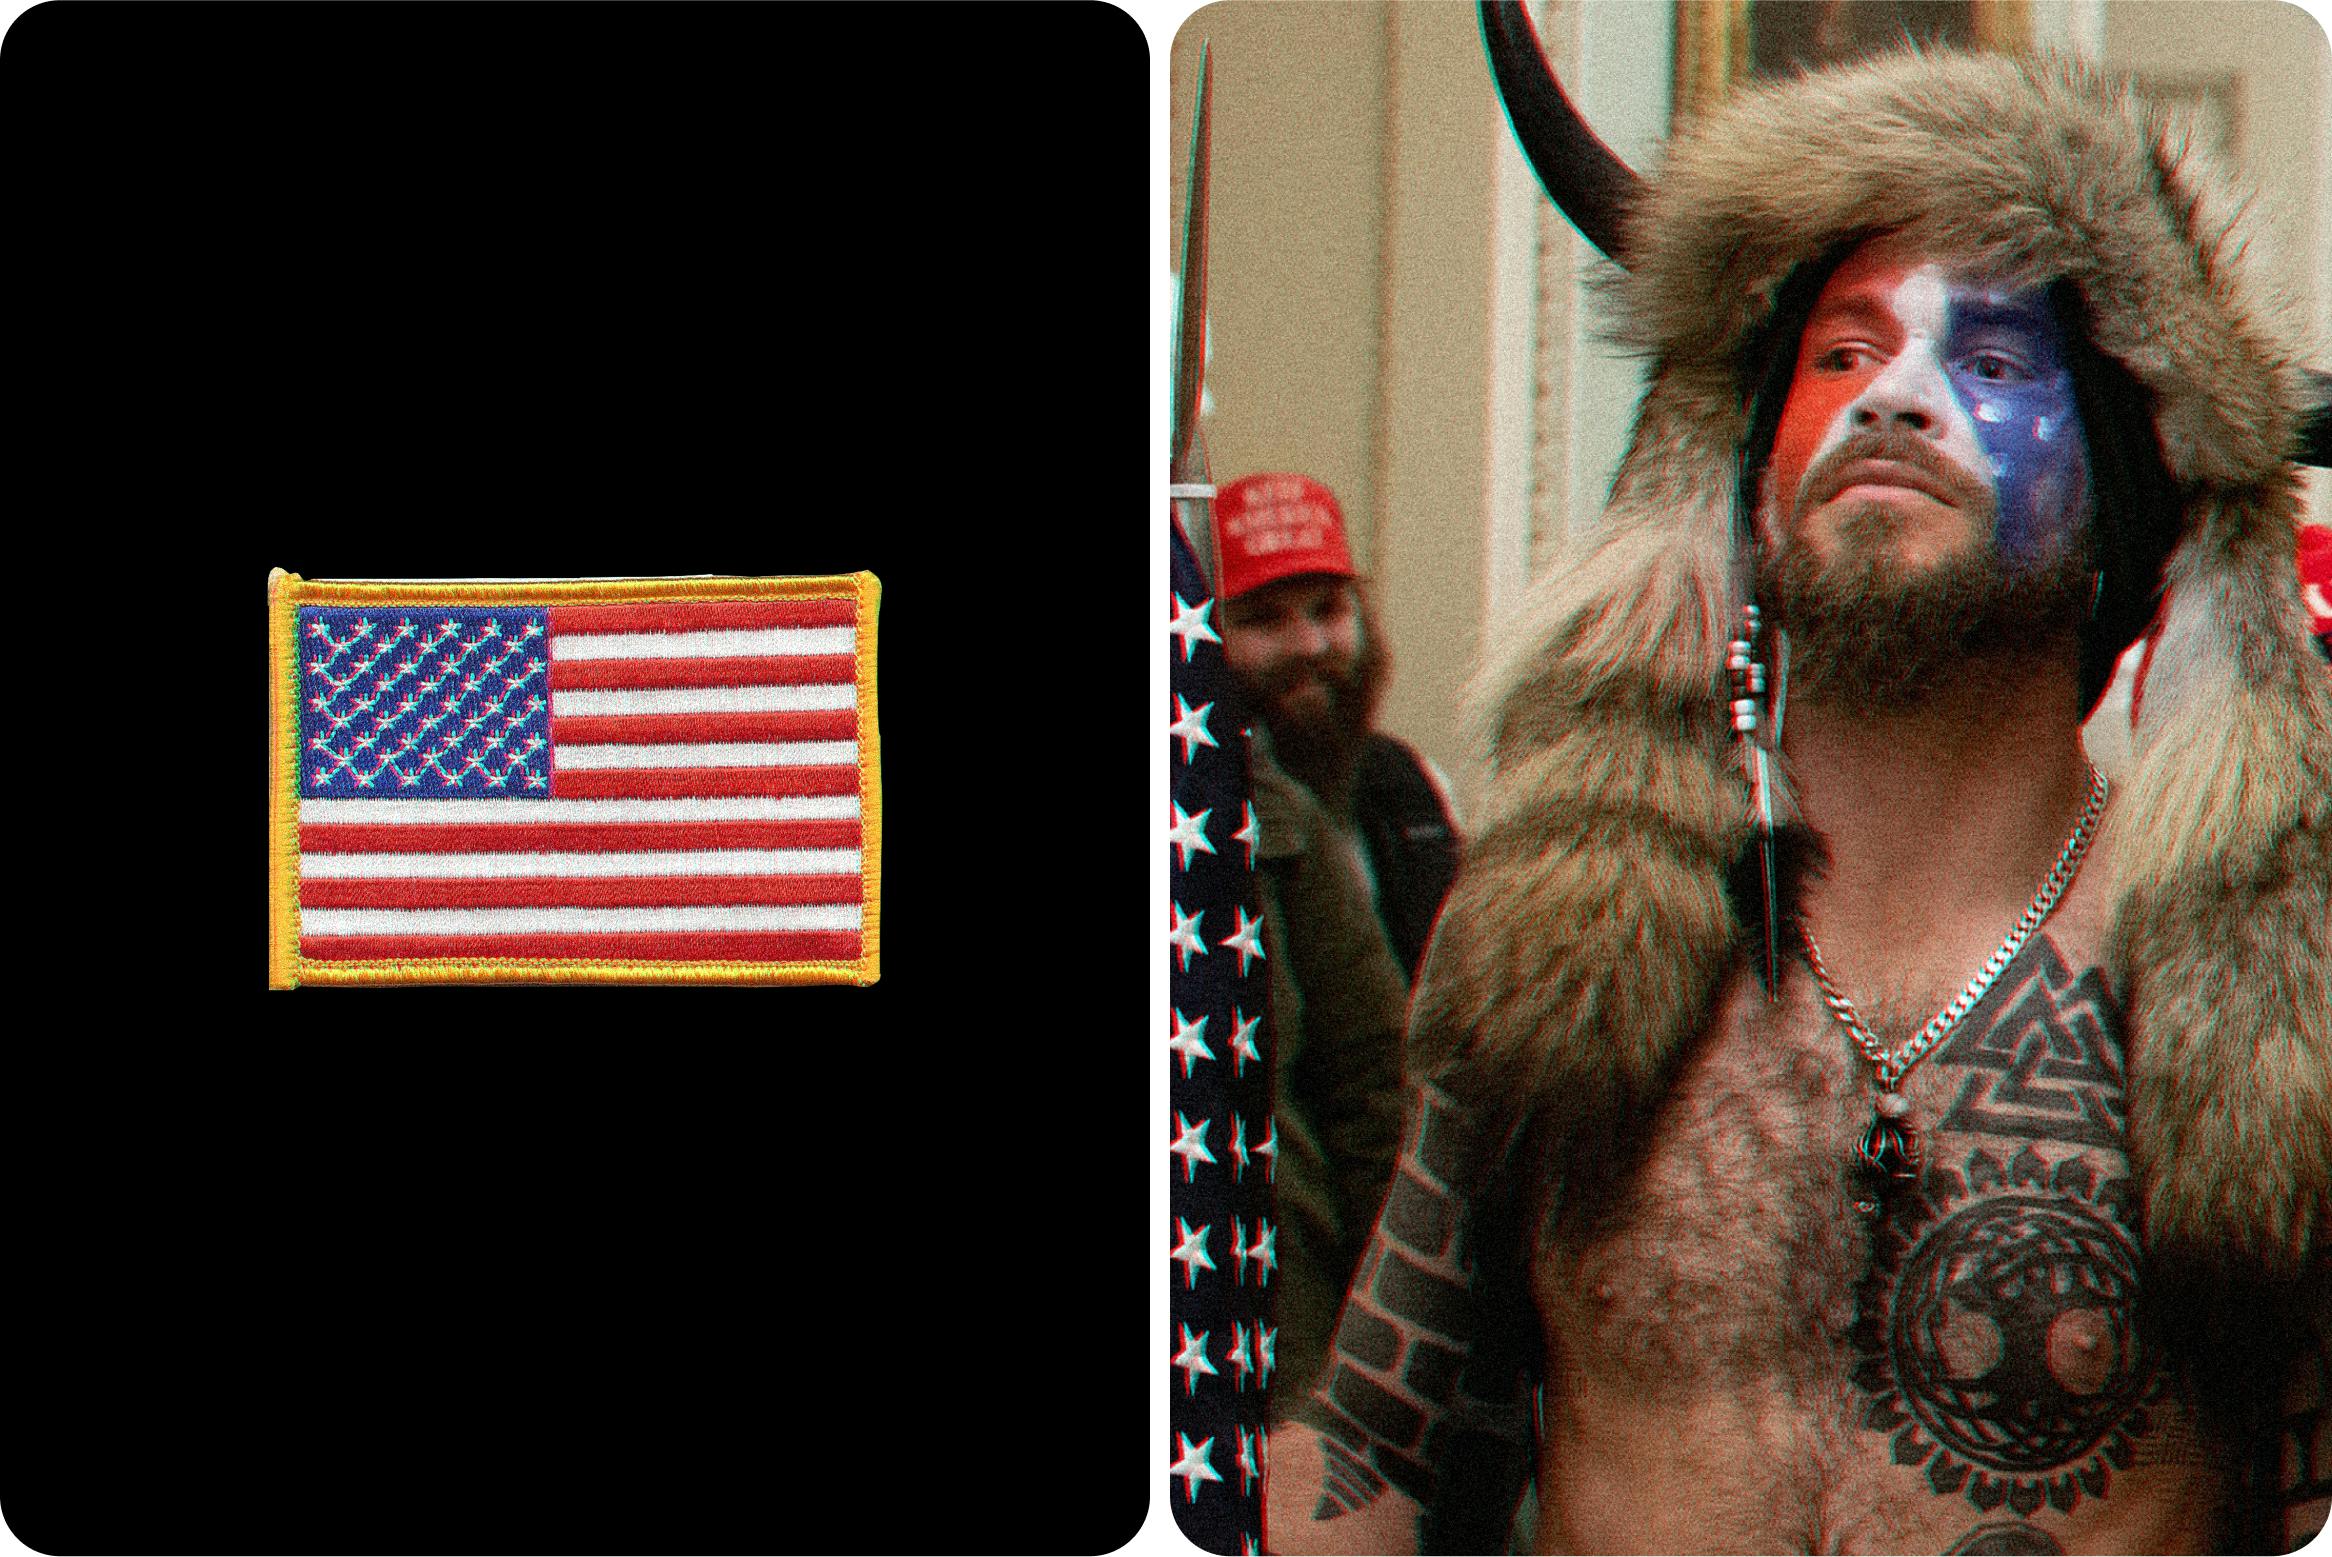 american flag and alt-right extremist wearing the american flag colors and a viking helmet